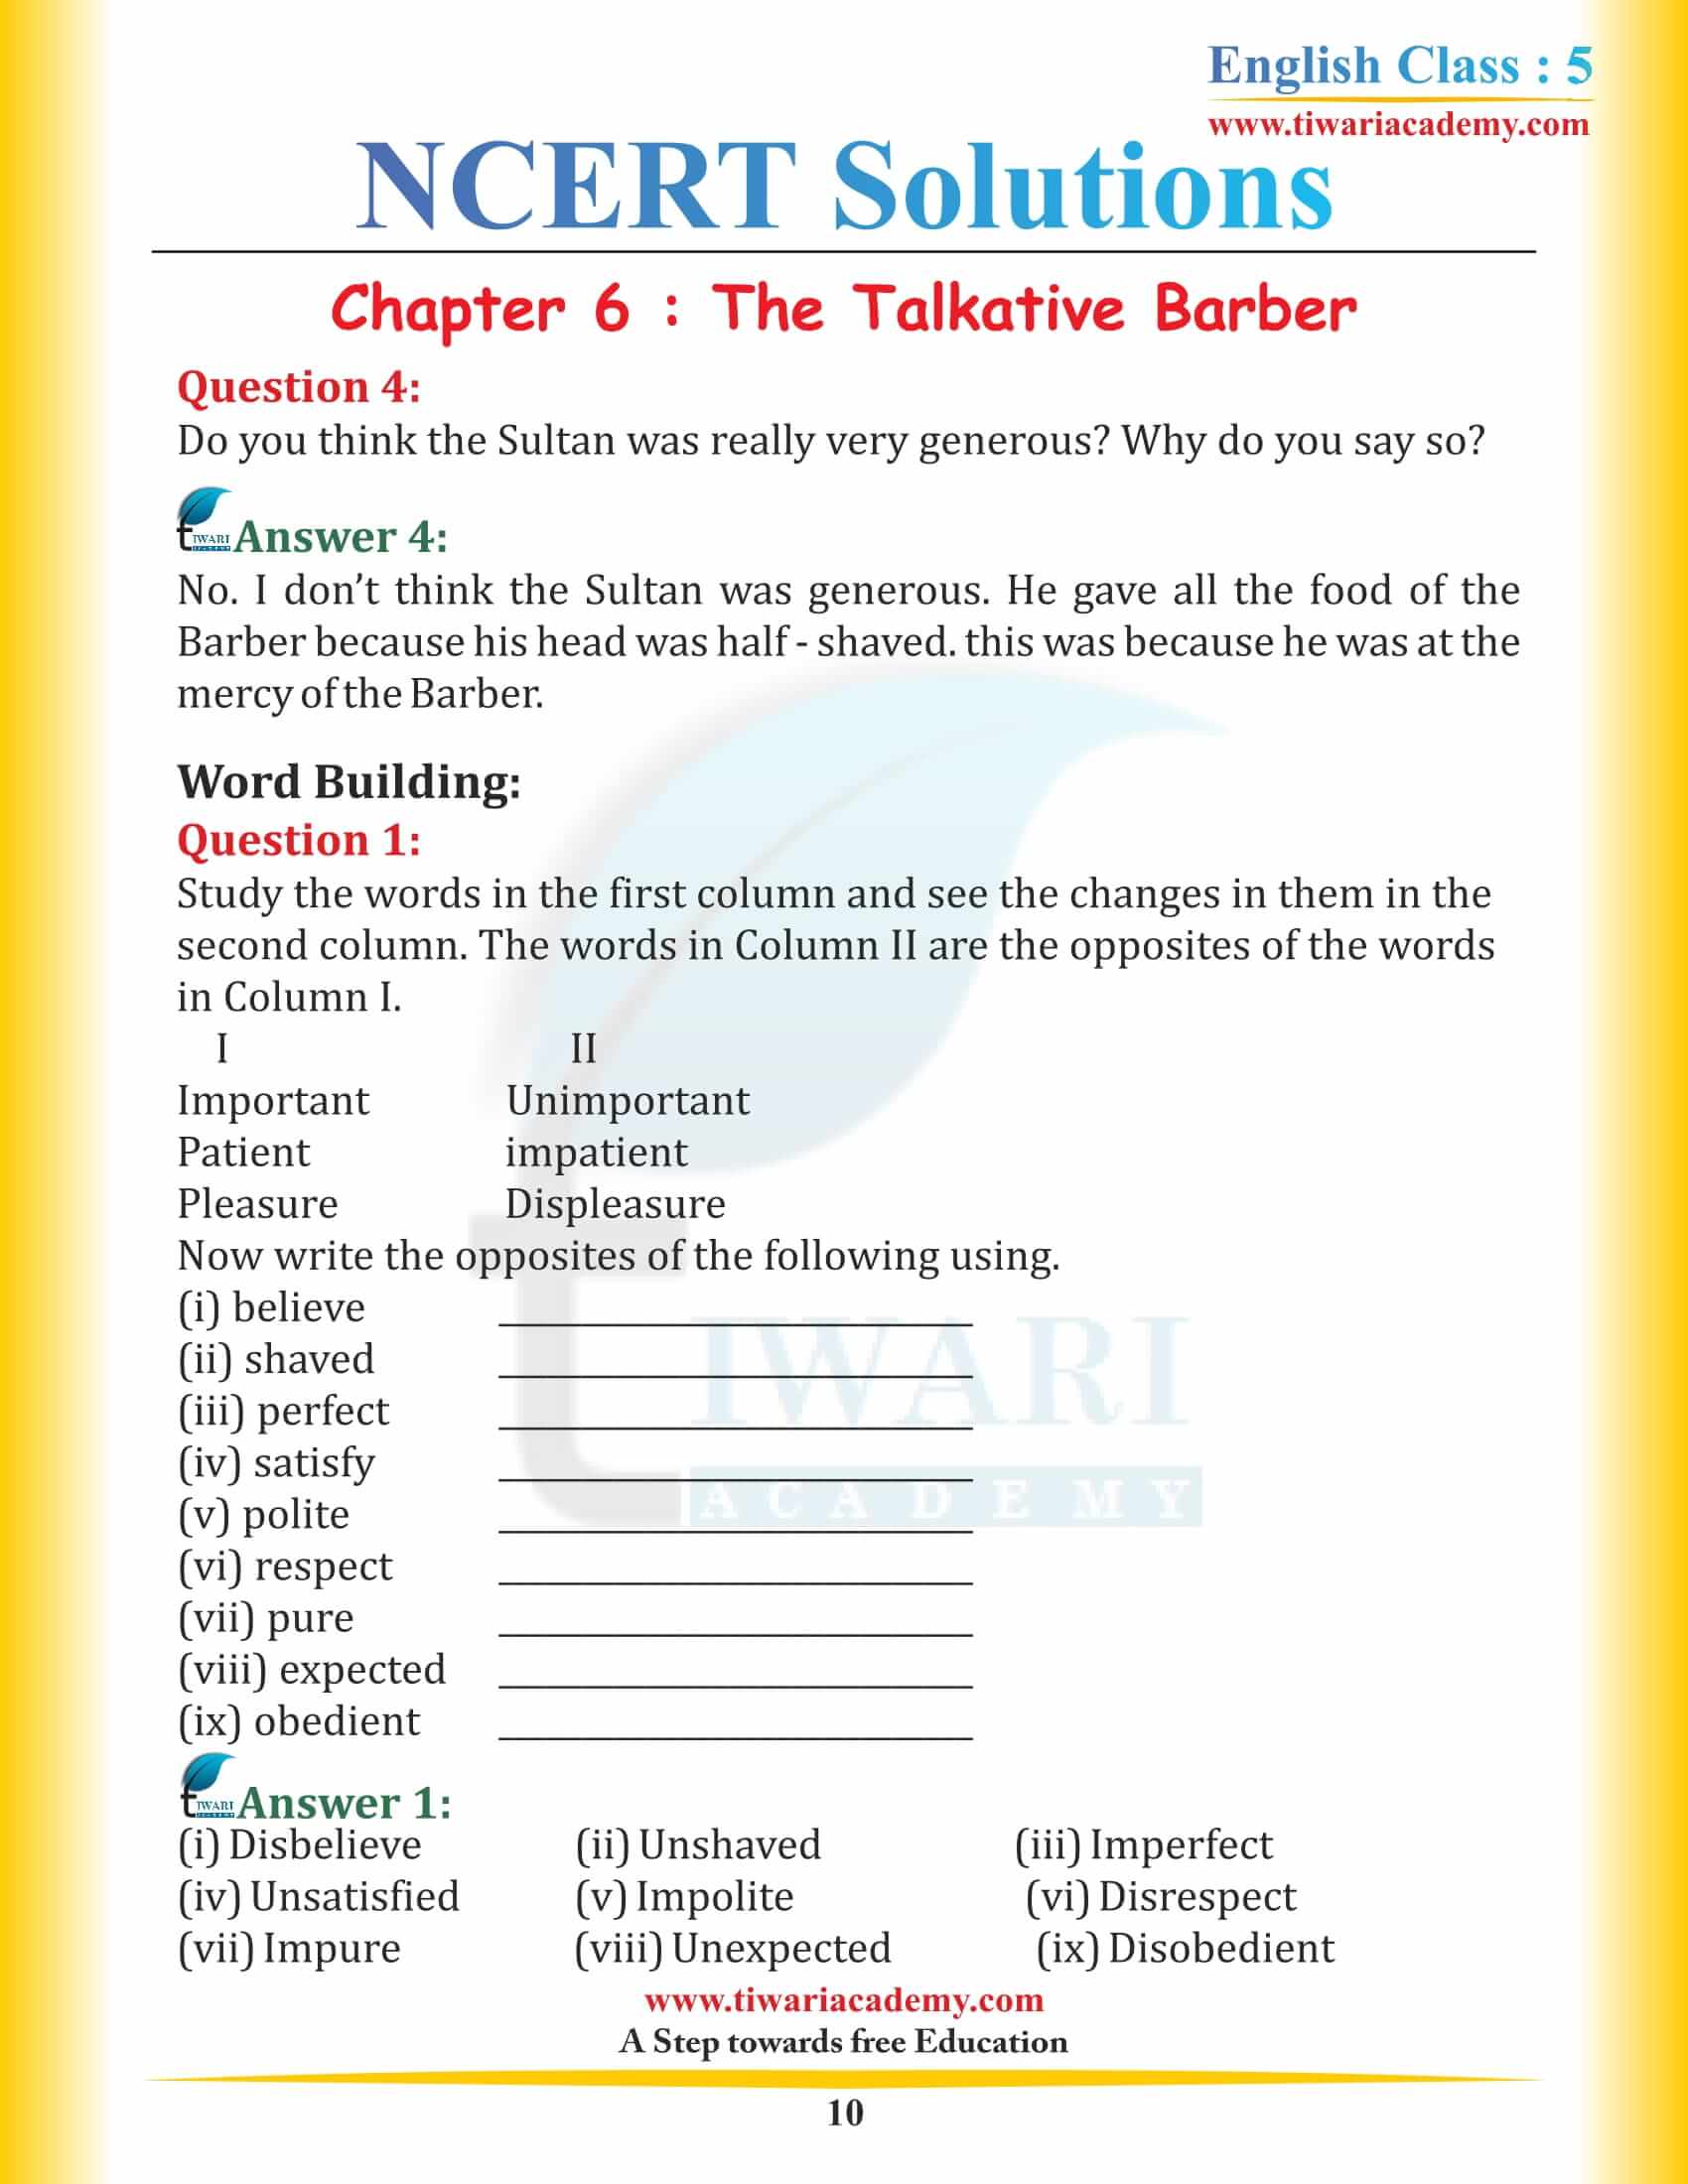 NCERT Solutions for Class 5 English Chapter 6 The Talkative Barber free pdf